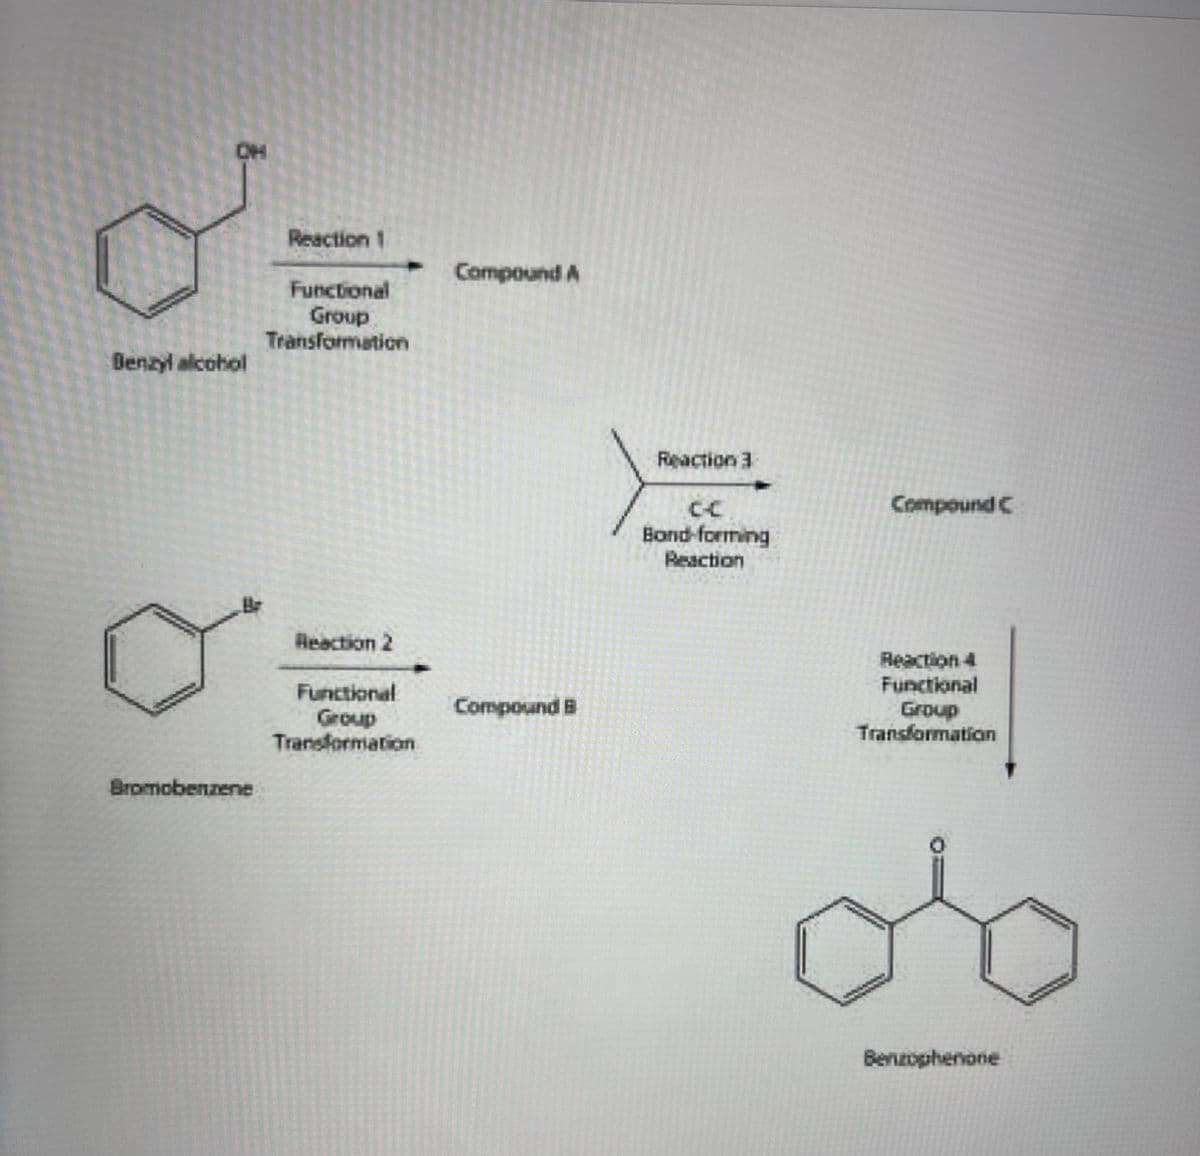 OH
Denzyl alcohol
Bromobenzene
Reaction 1
- Compound A
Functional
Group
Transformation
Reaction 2
Functional
Group
Transformation
Compound B
Reaction 3
Bond-forming
Reaction
Compound C
Reaction 4
Functional
Group
Transformation
Bentophenone